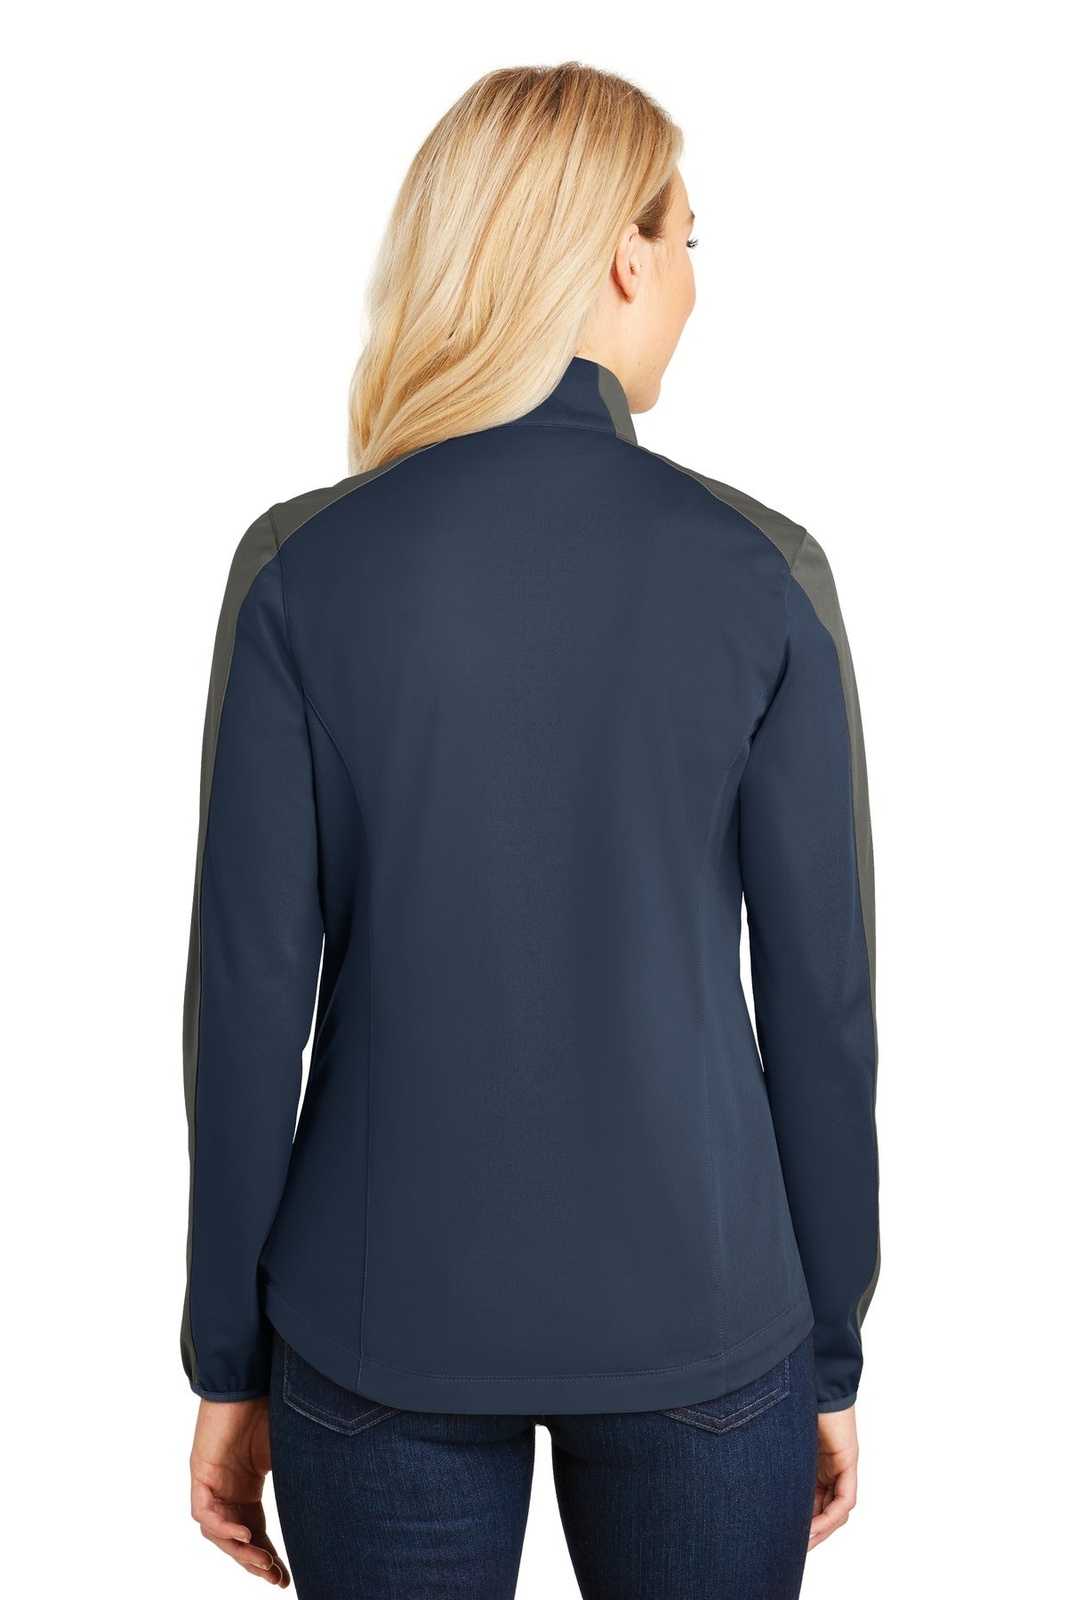 Port Authority L718 Ladies Active Colorblock Soft Shell Jacket - Dress Blue Navy Gray Steel - HIT a Double - 2